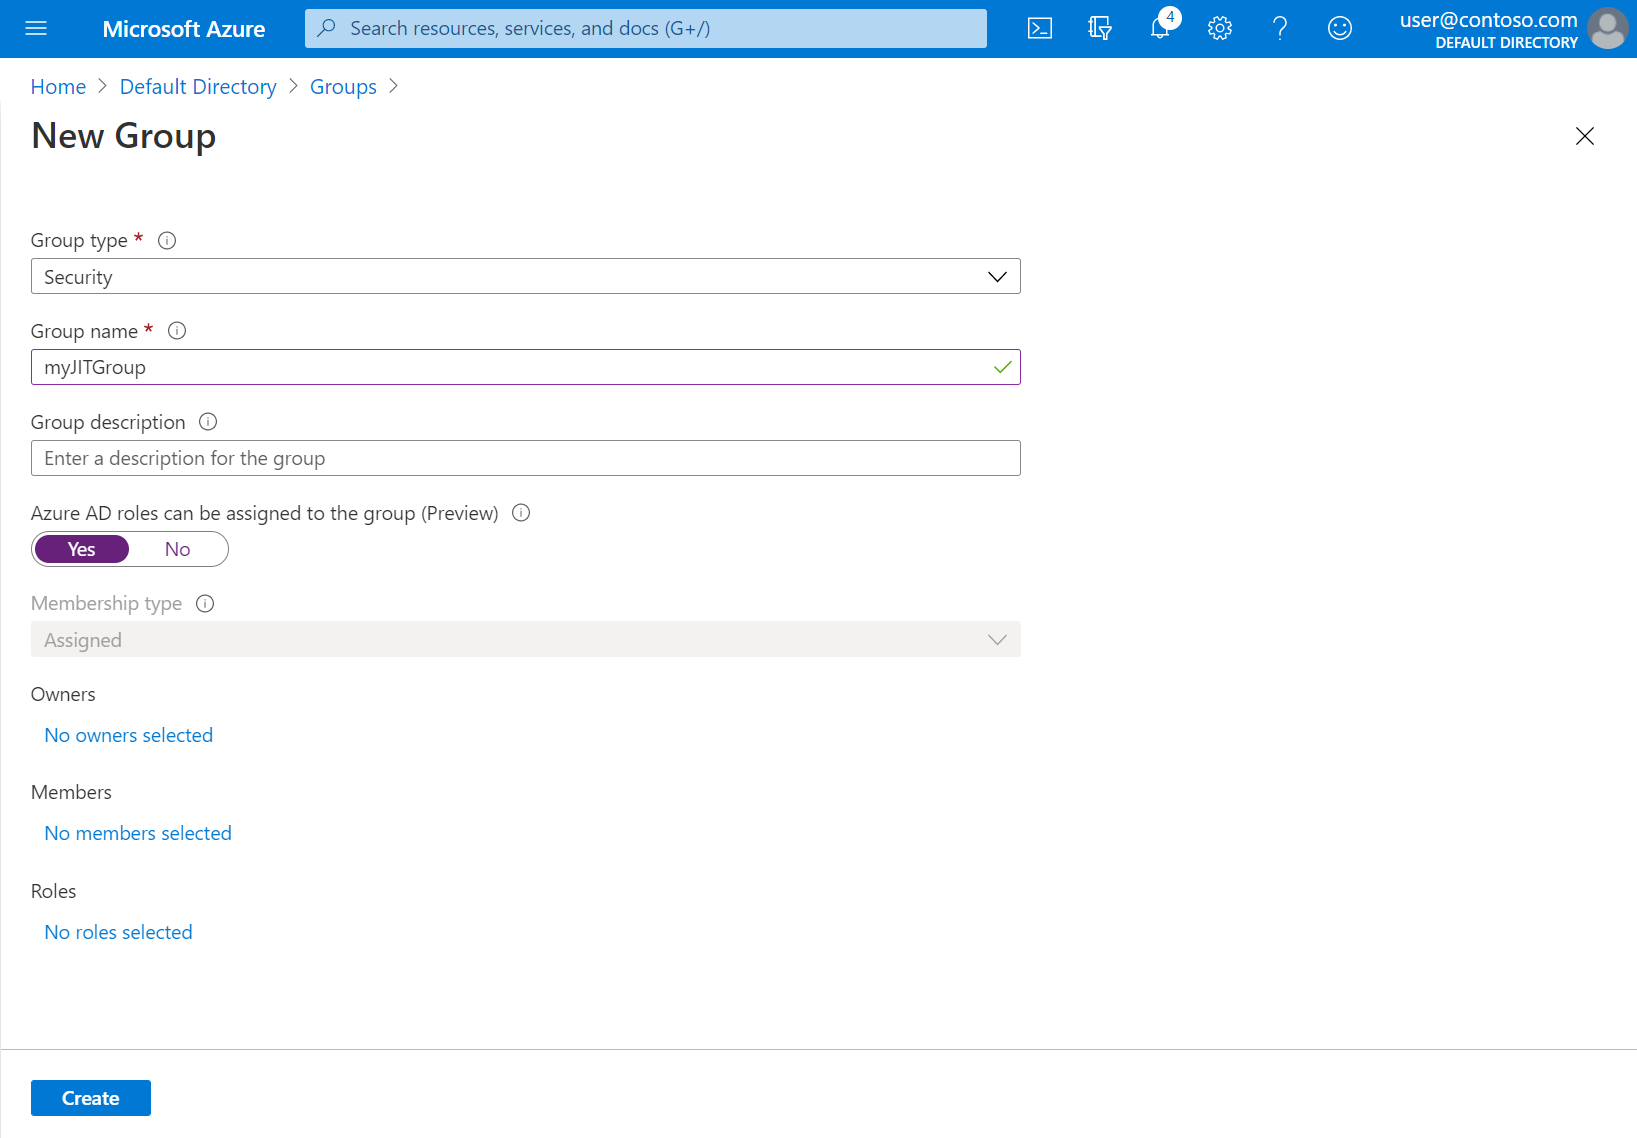 Shows the Azure portal's new group creation screen.